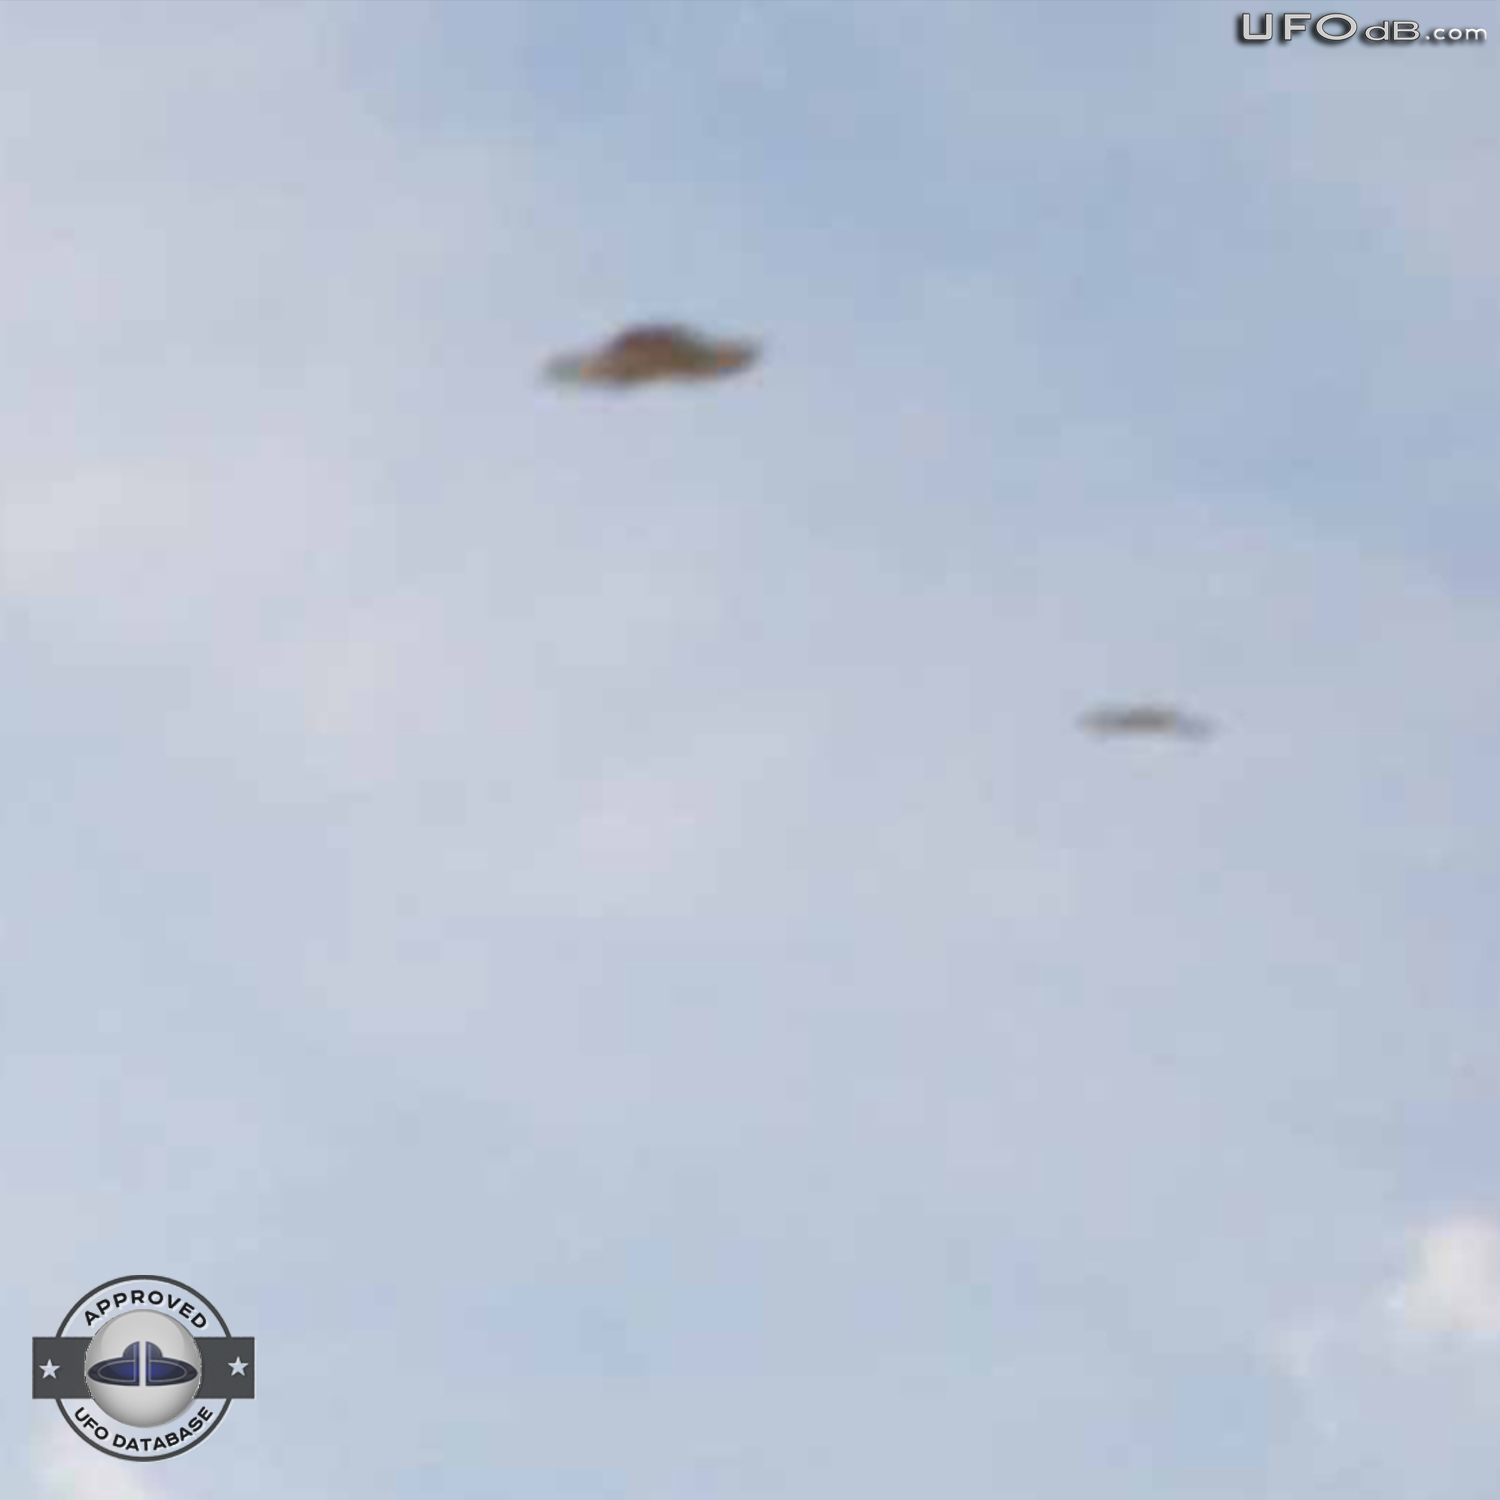 Amsterdam weed grower see three saucer UFOs passing in the sky UFO Picture #366-5